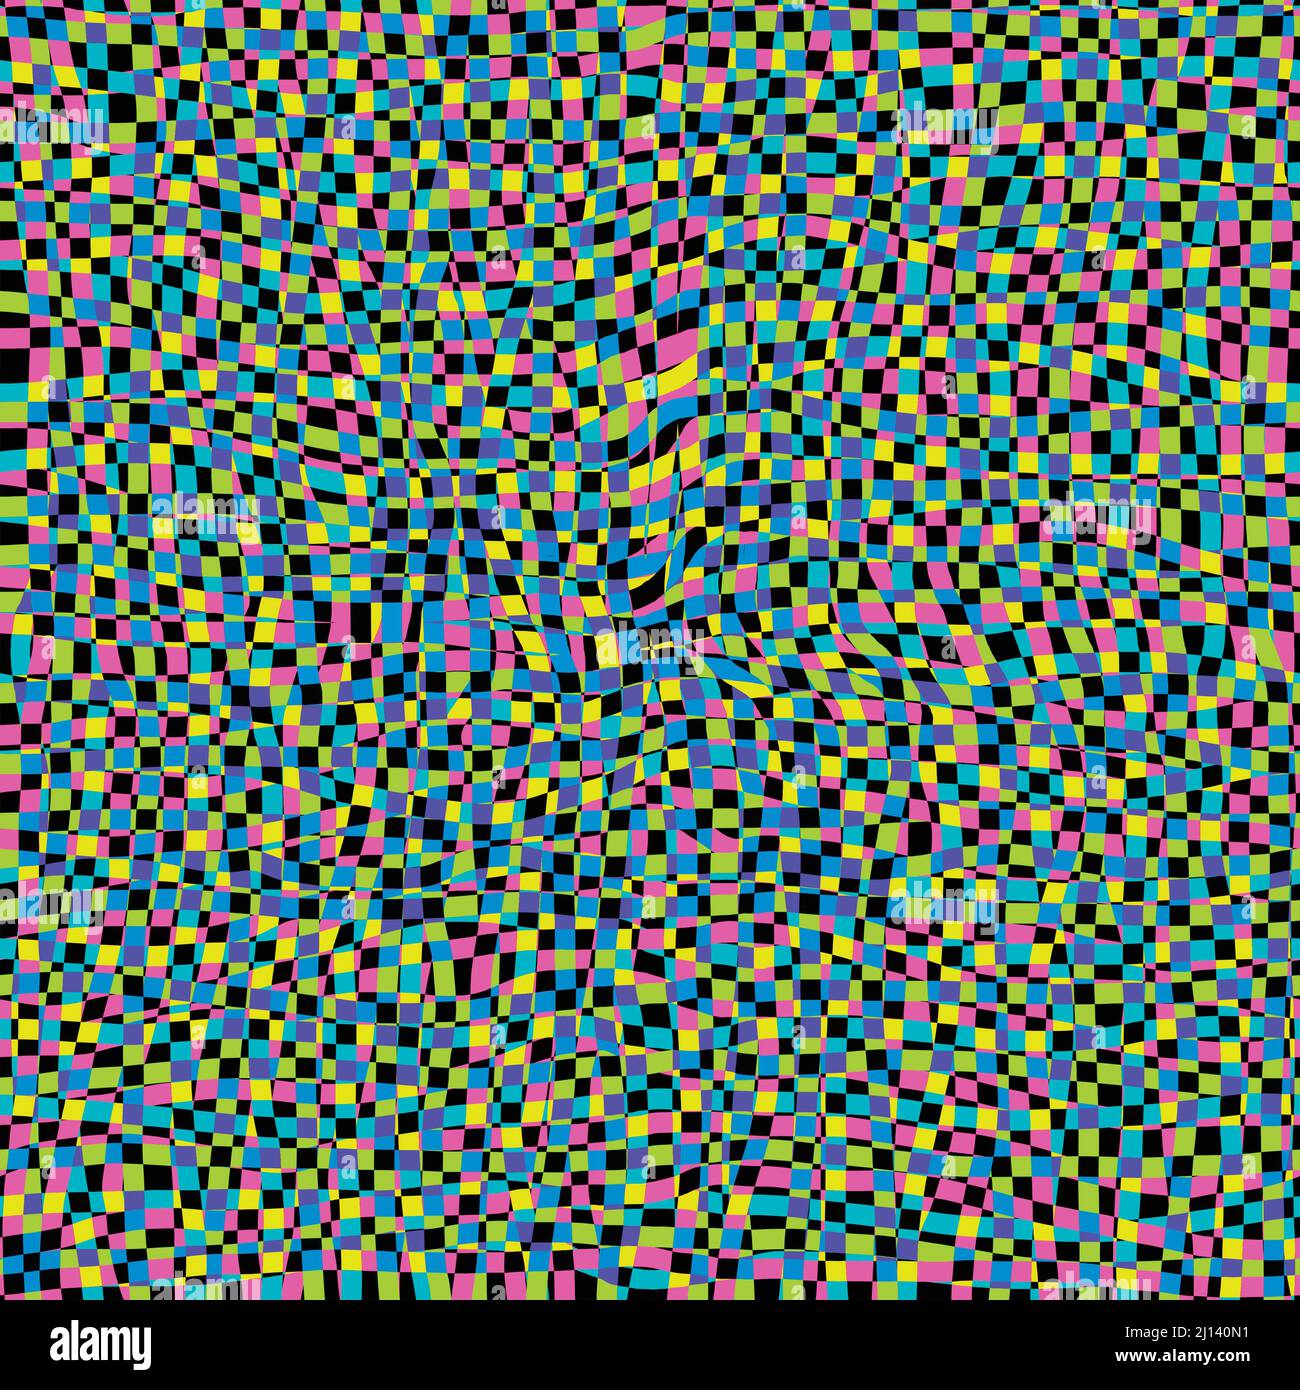 Abstract repeating pattern tile made of small multicoloured elements Stock Photo